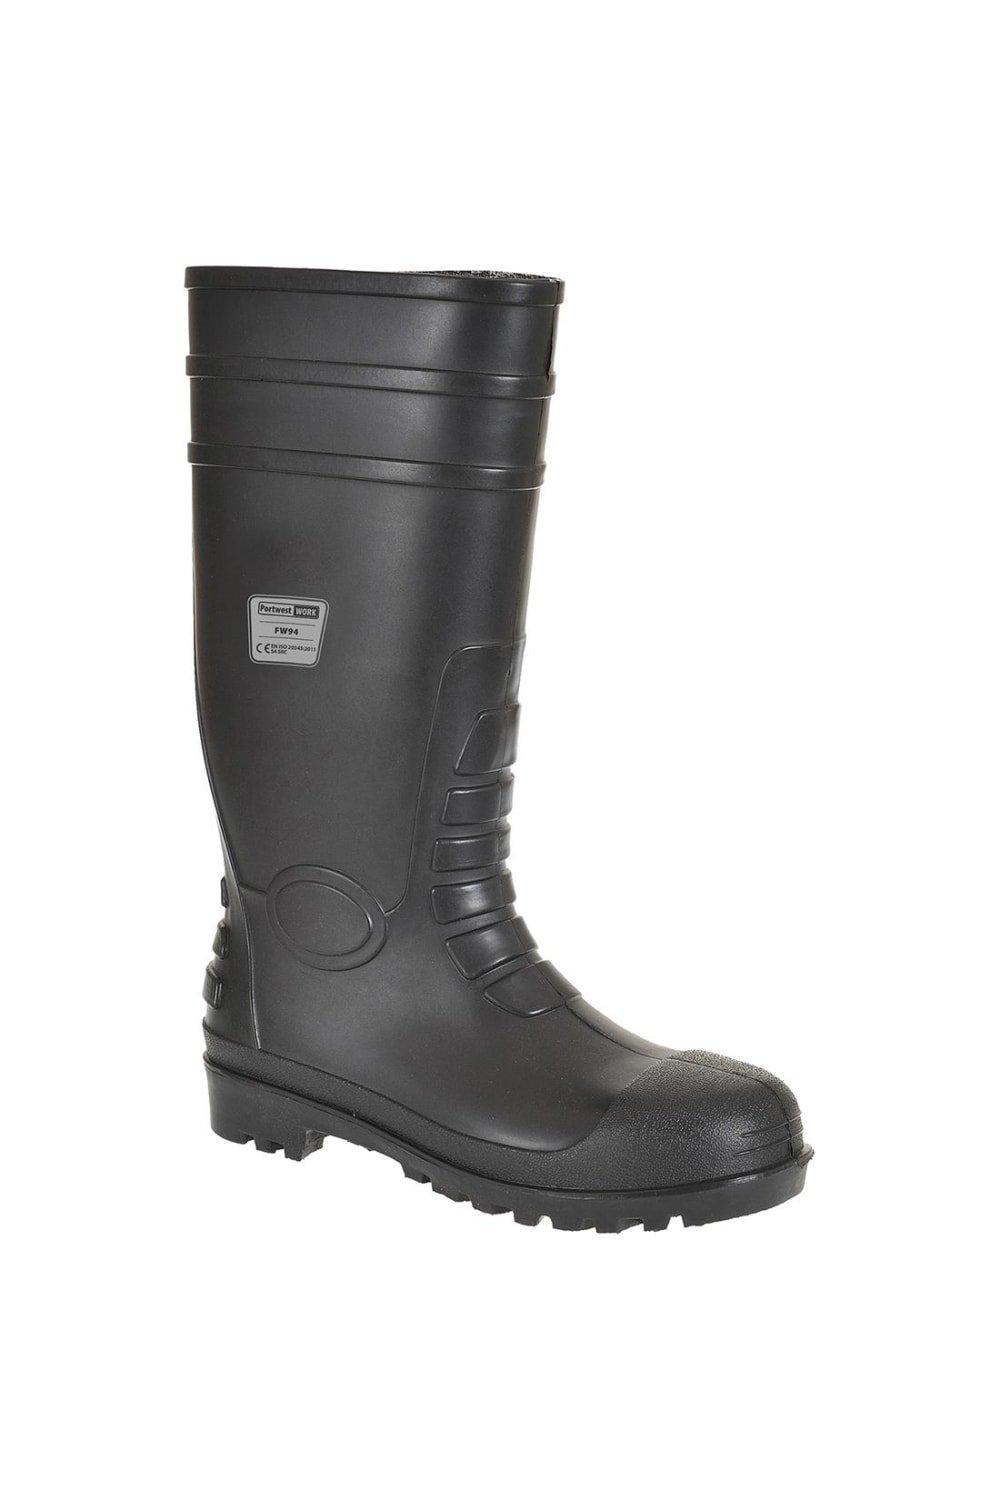 Classic Safety Wellington Boots